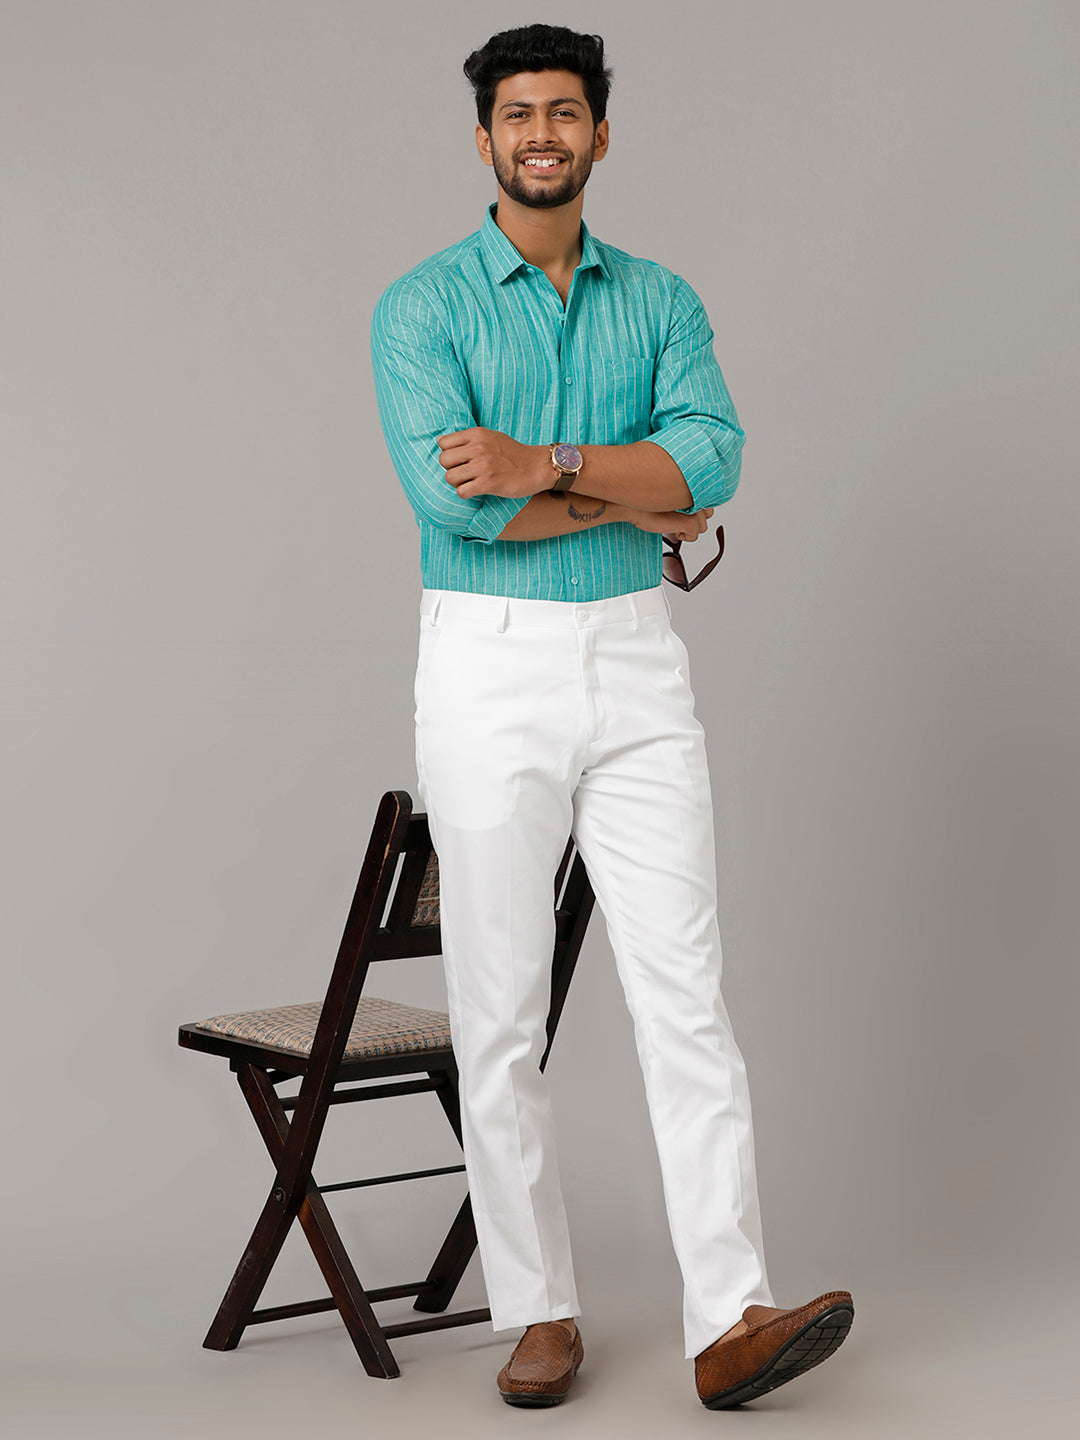 Buy Man Pant Shirt Party and Casual Fit and Stylish Pant Shirt Good Looking  Sky Blue Shirt White Pant Events Wear Dress New Casual Fit Man Dress Online  in India - Etsy